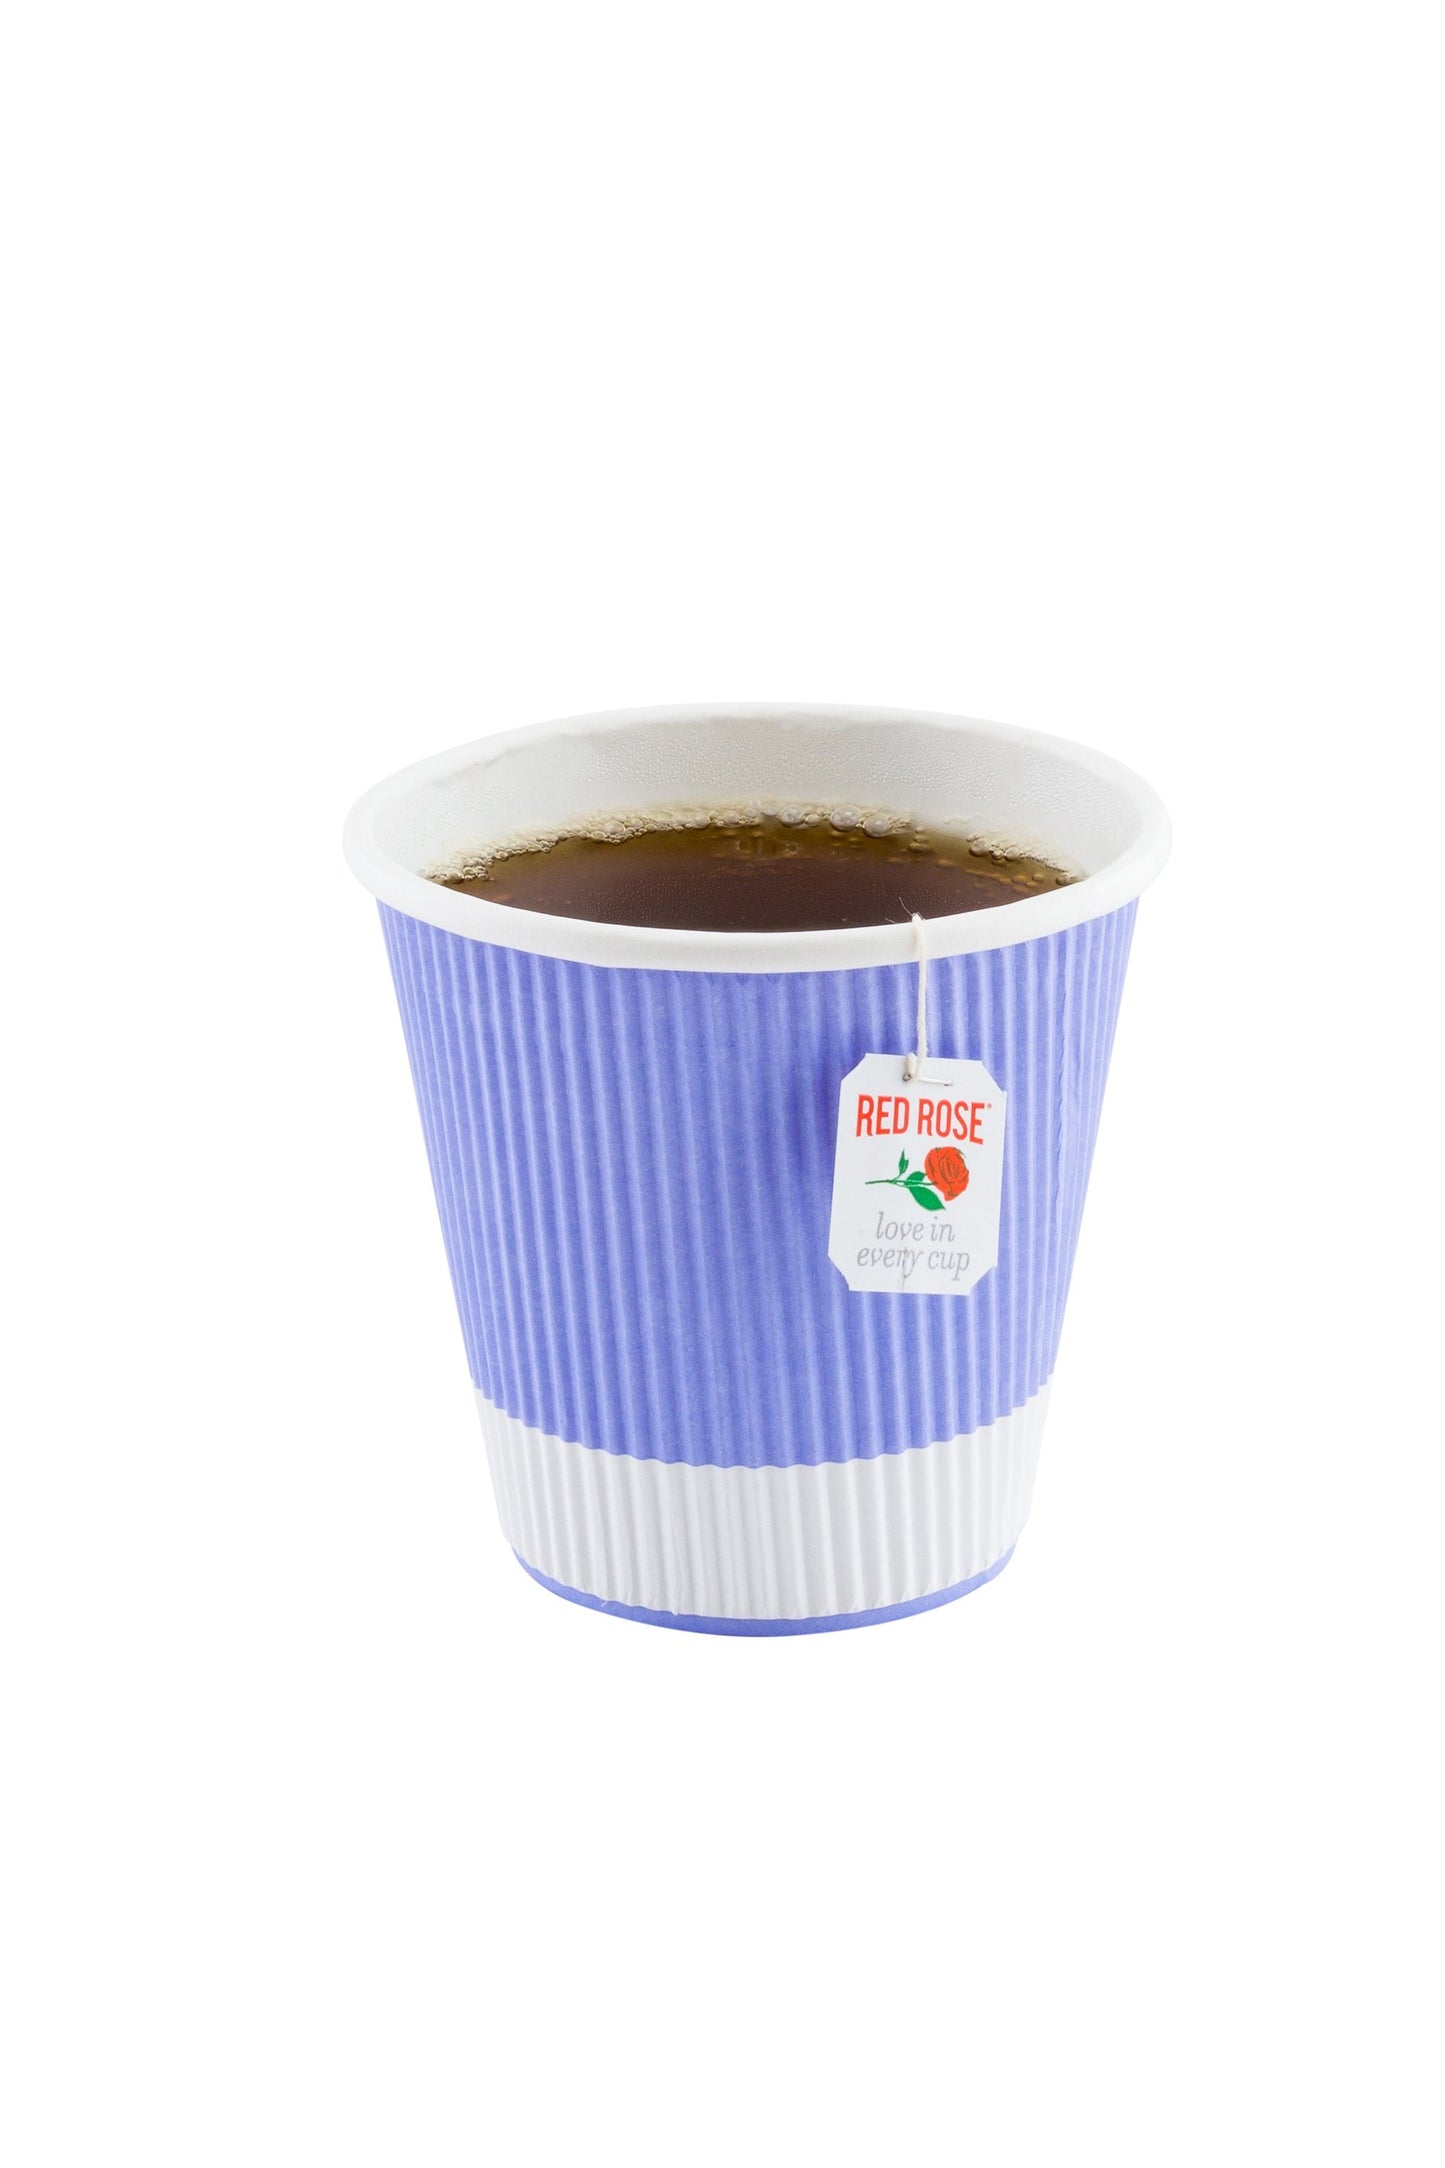 8 oz Light Purple Paper Coffee Cup - Ripple Wall - 3 1/2" x 3 1/2" x 3 1/4" - 500 count boxwww.ecoware.ae                               